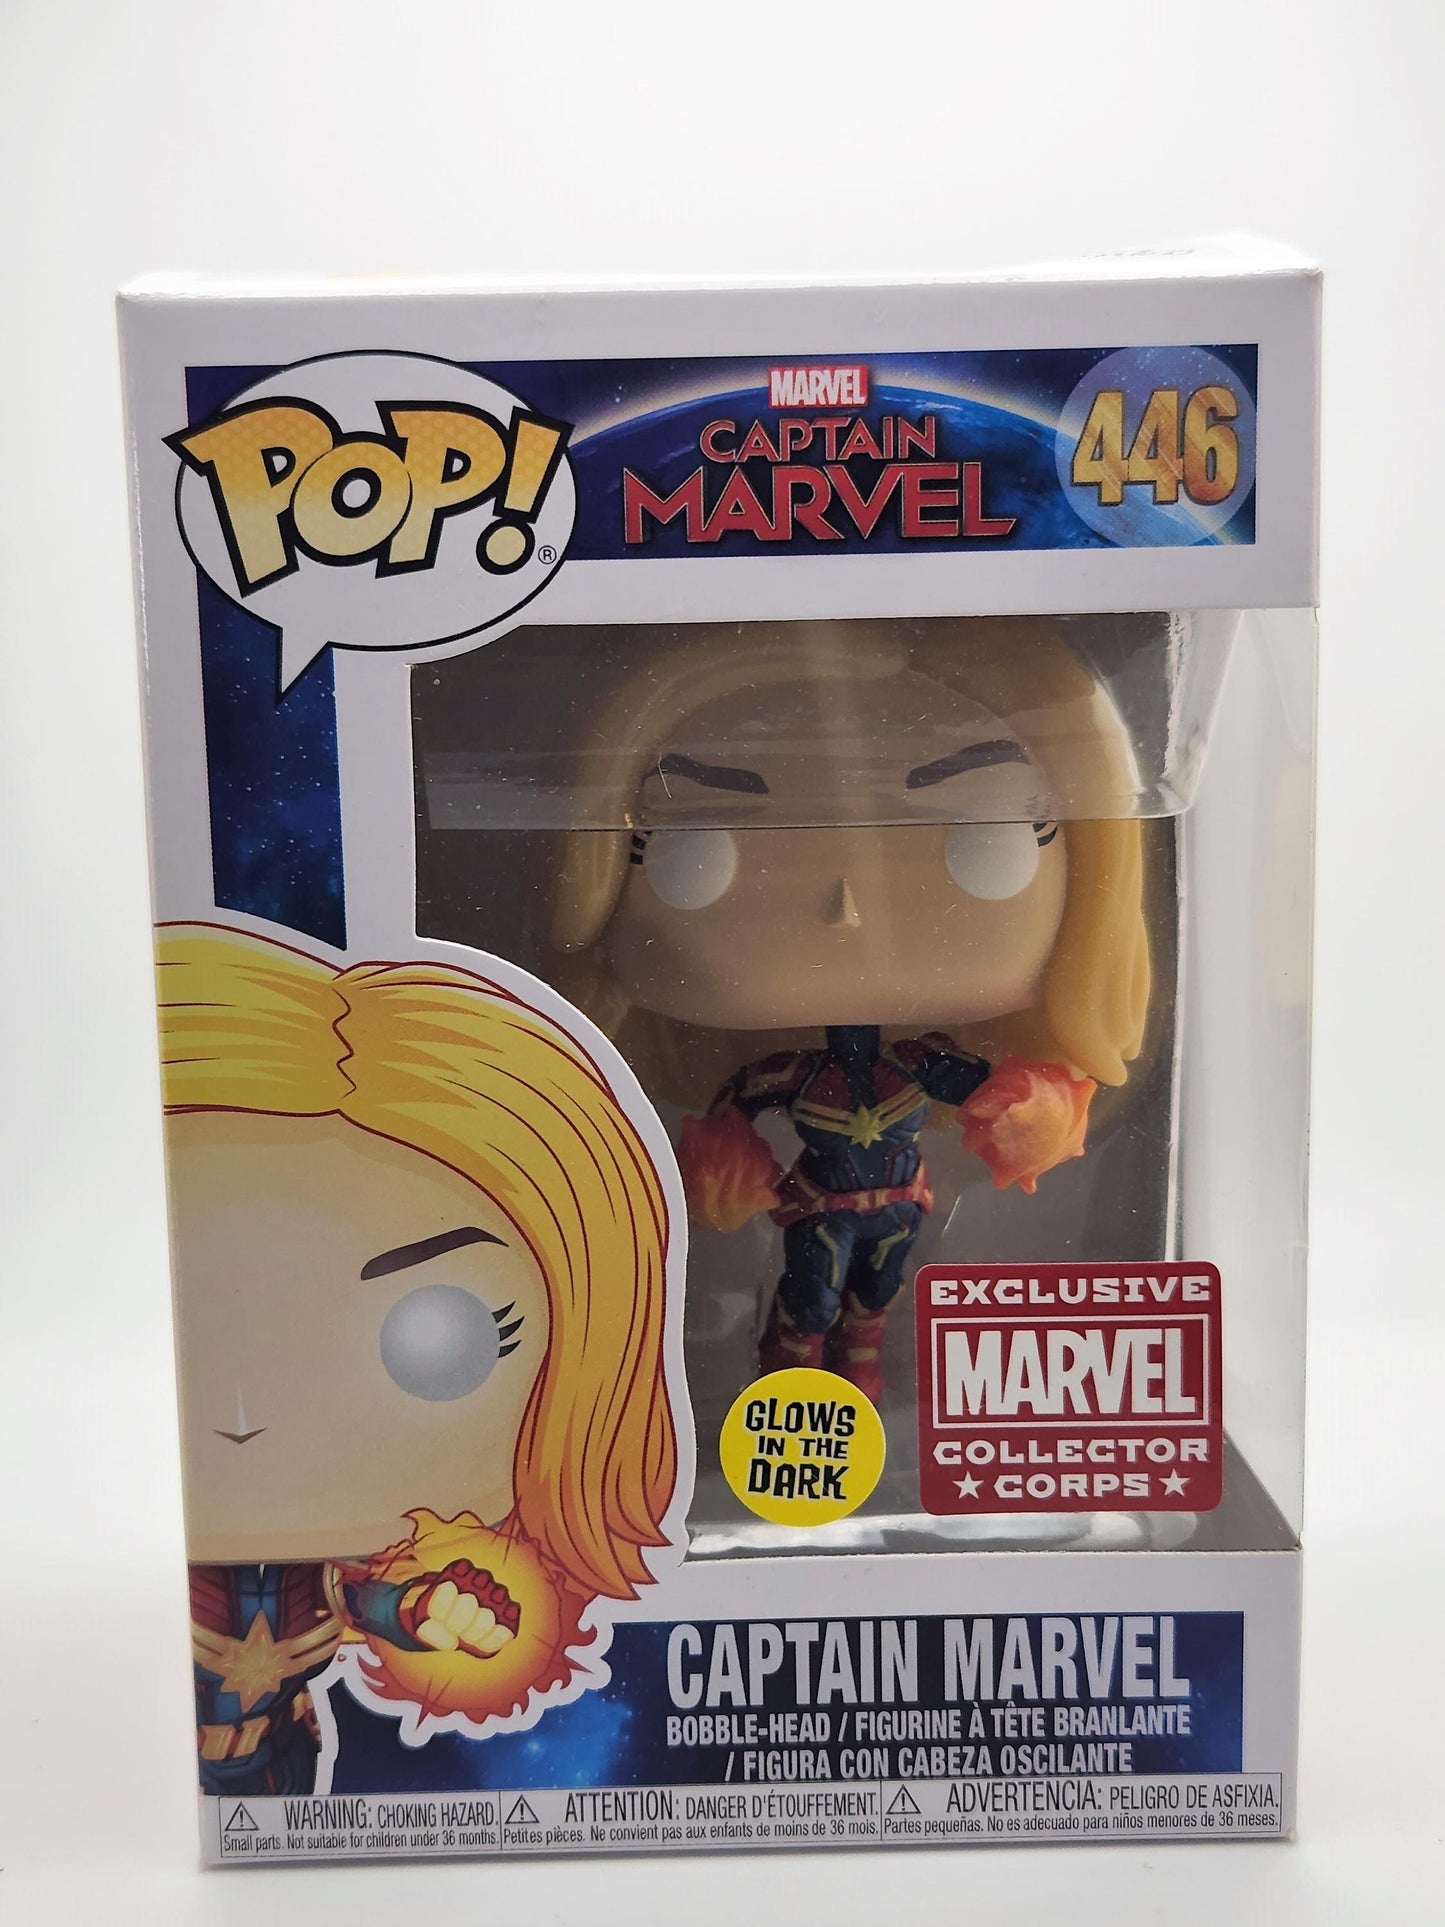 Captain Marvel (Flying) (Glow) - #446 - Box Condition 6/10